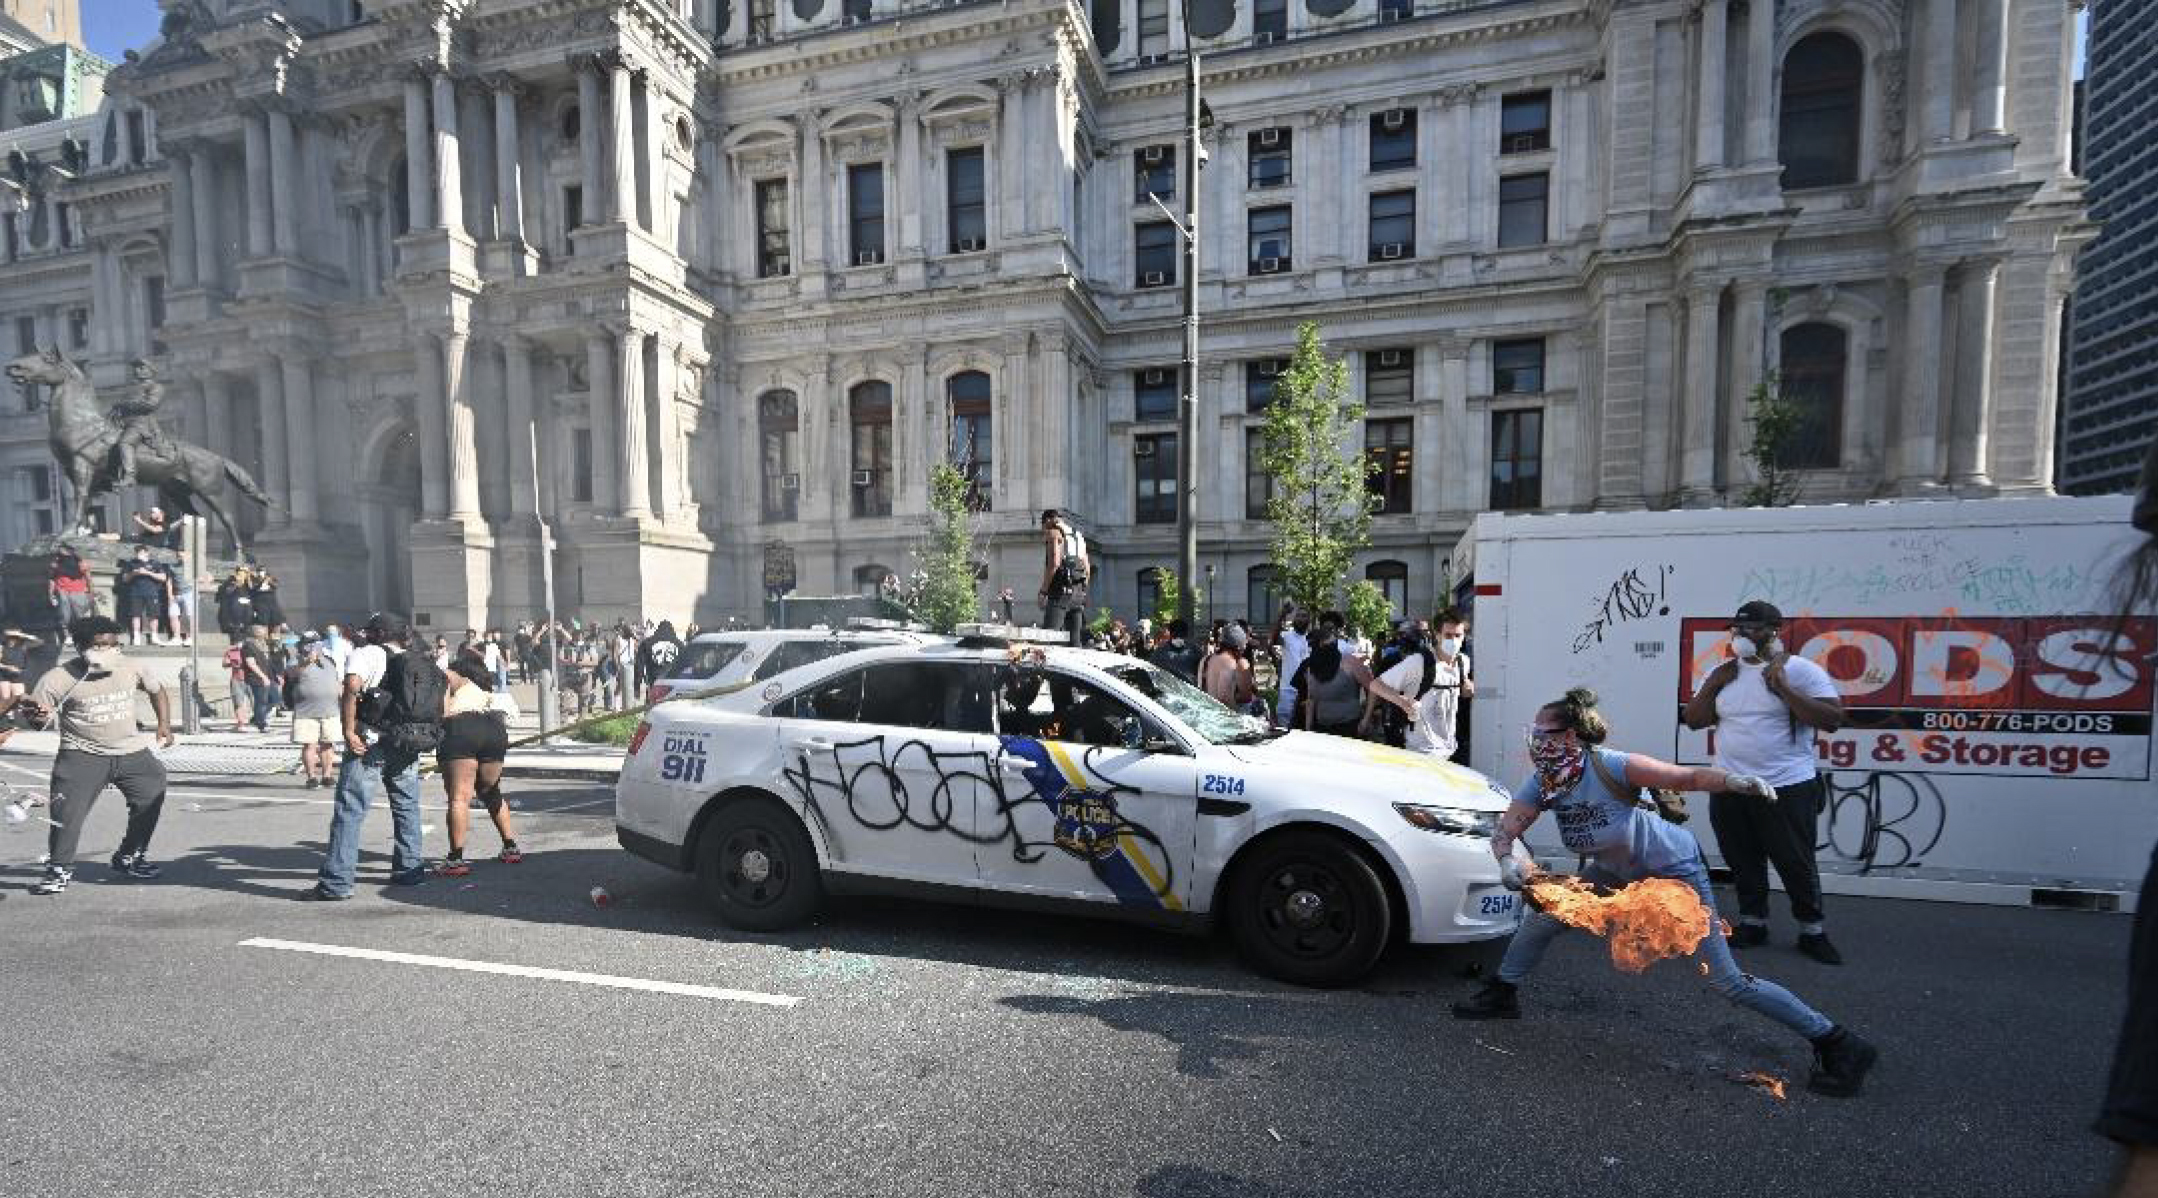 FBI tracked Philly protester through Etsy, LinkedIn to charge her with torching police cars